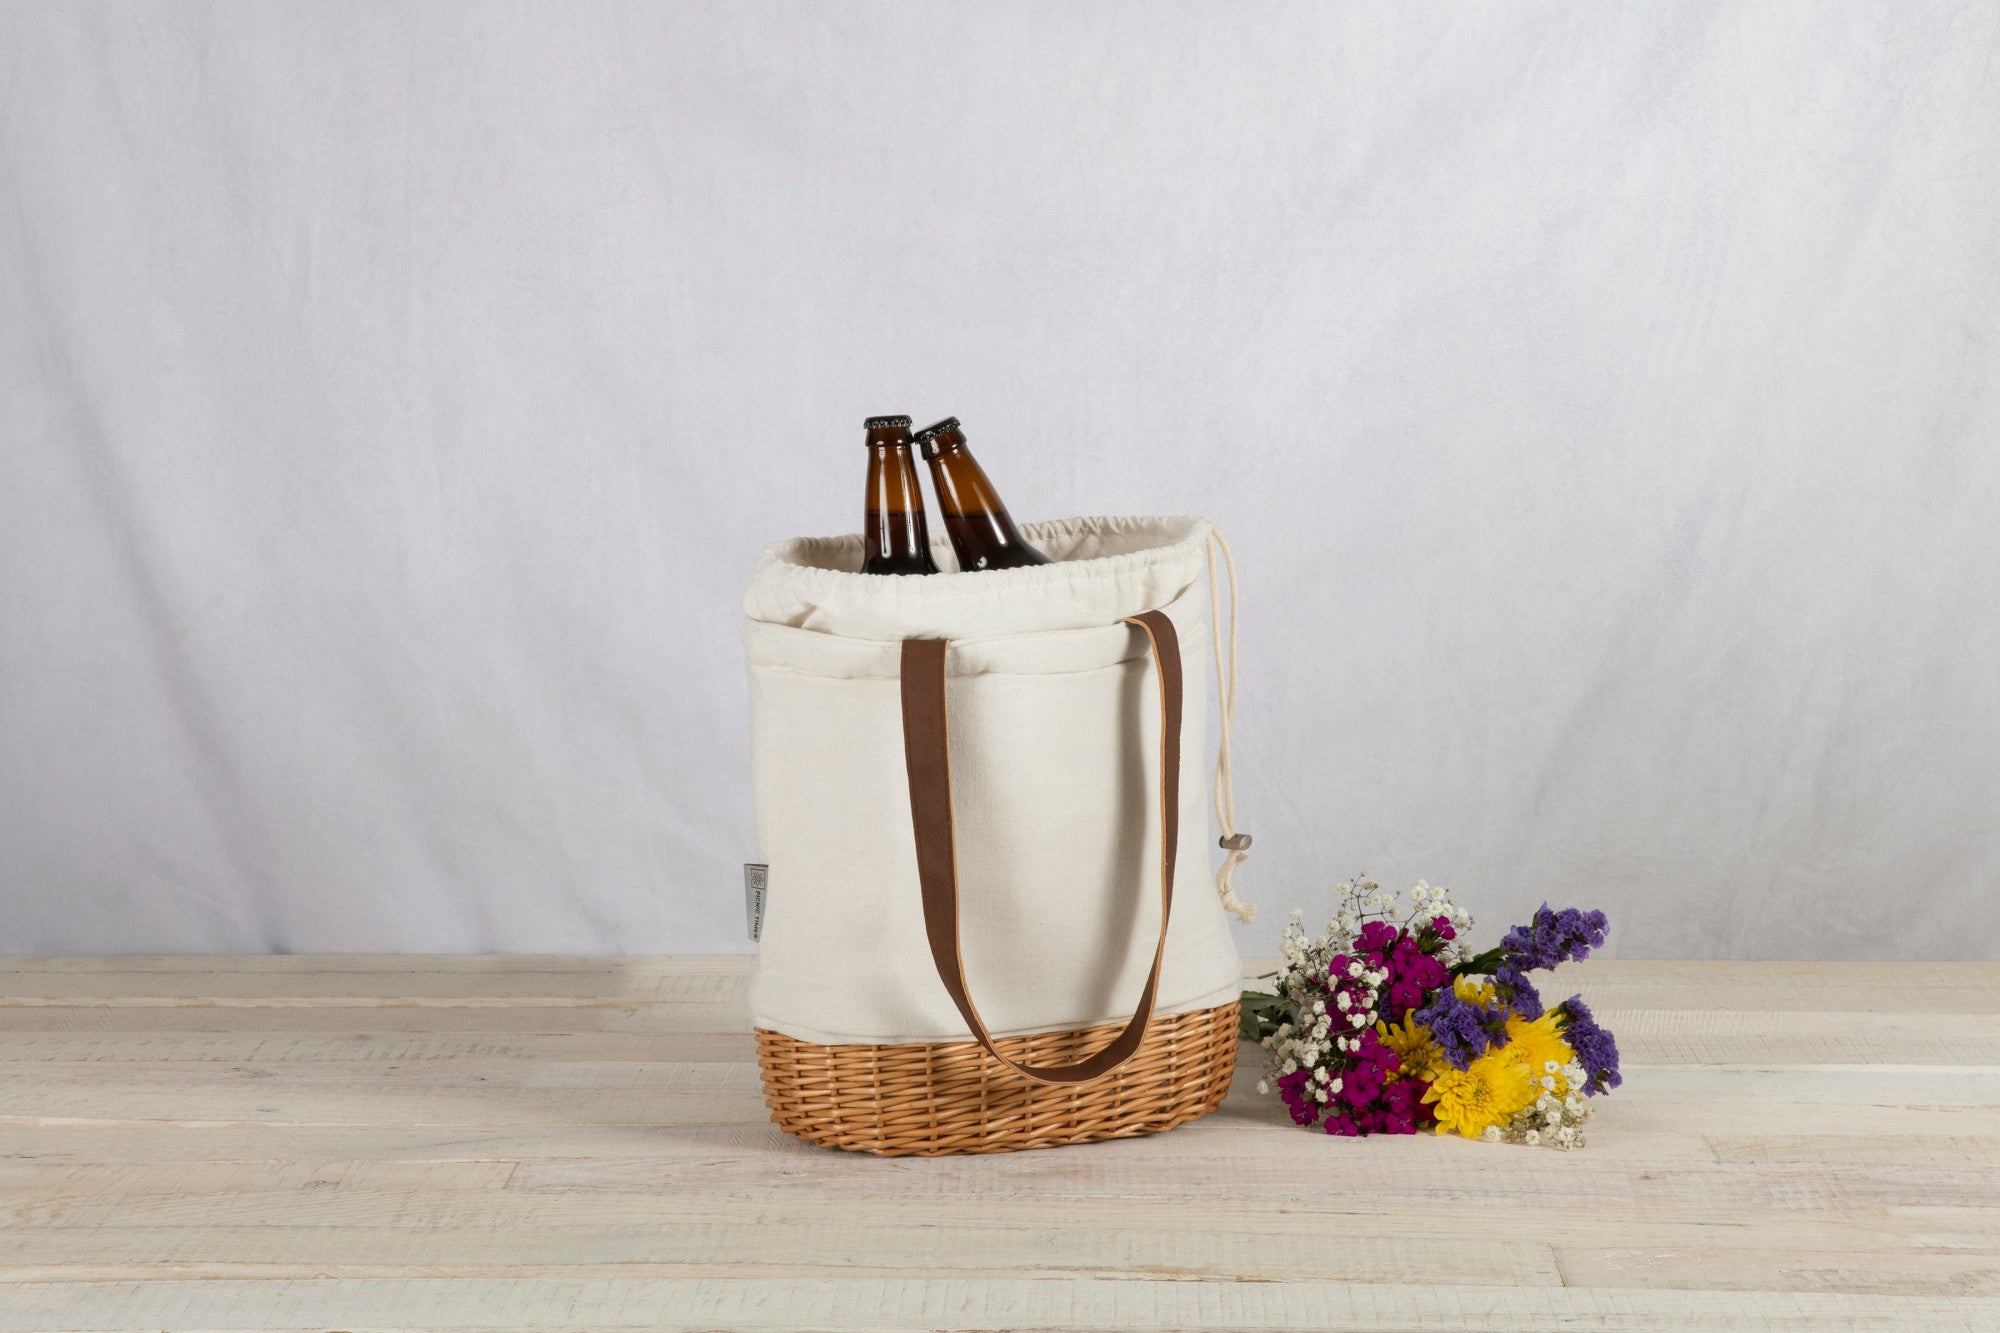 Chicago Bears - Pico Willow and Canvas Lunch Basket